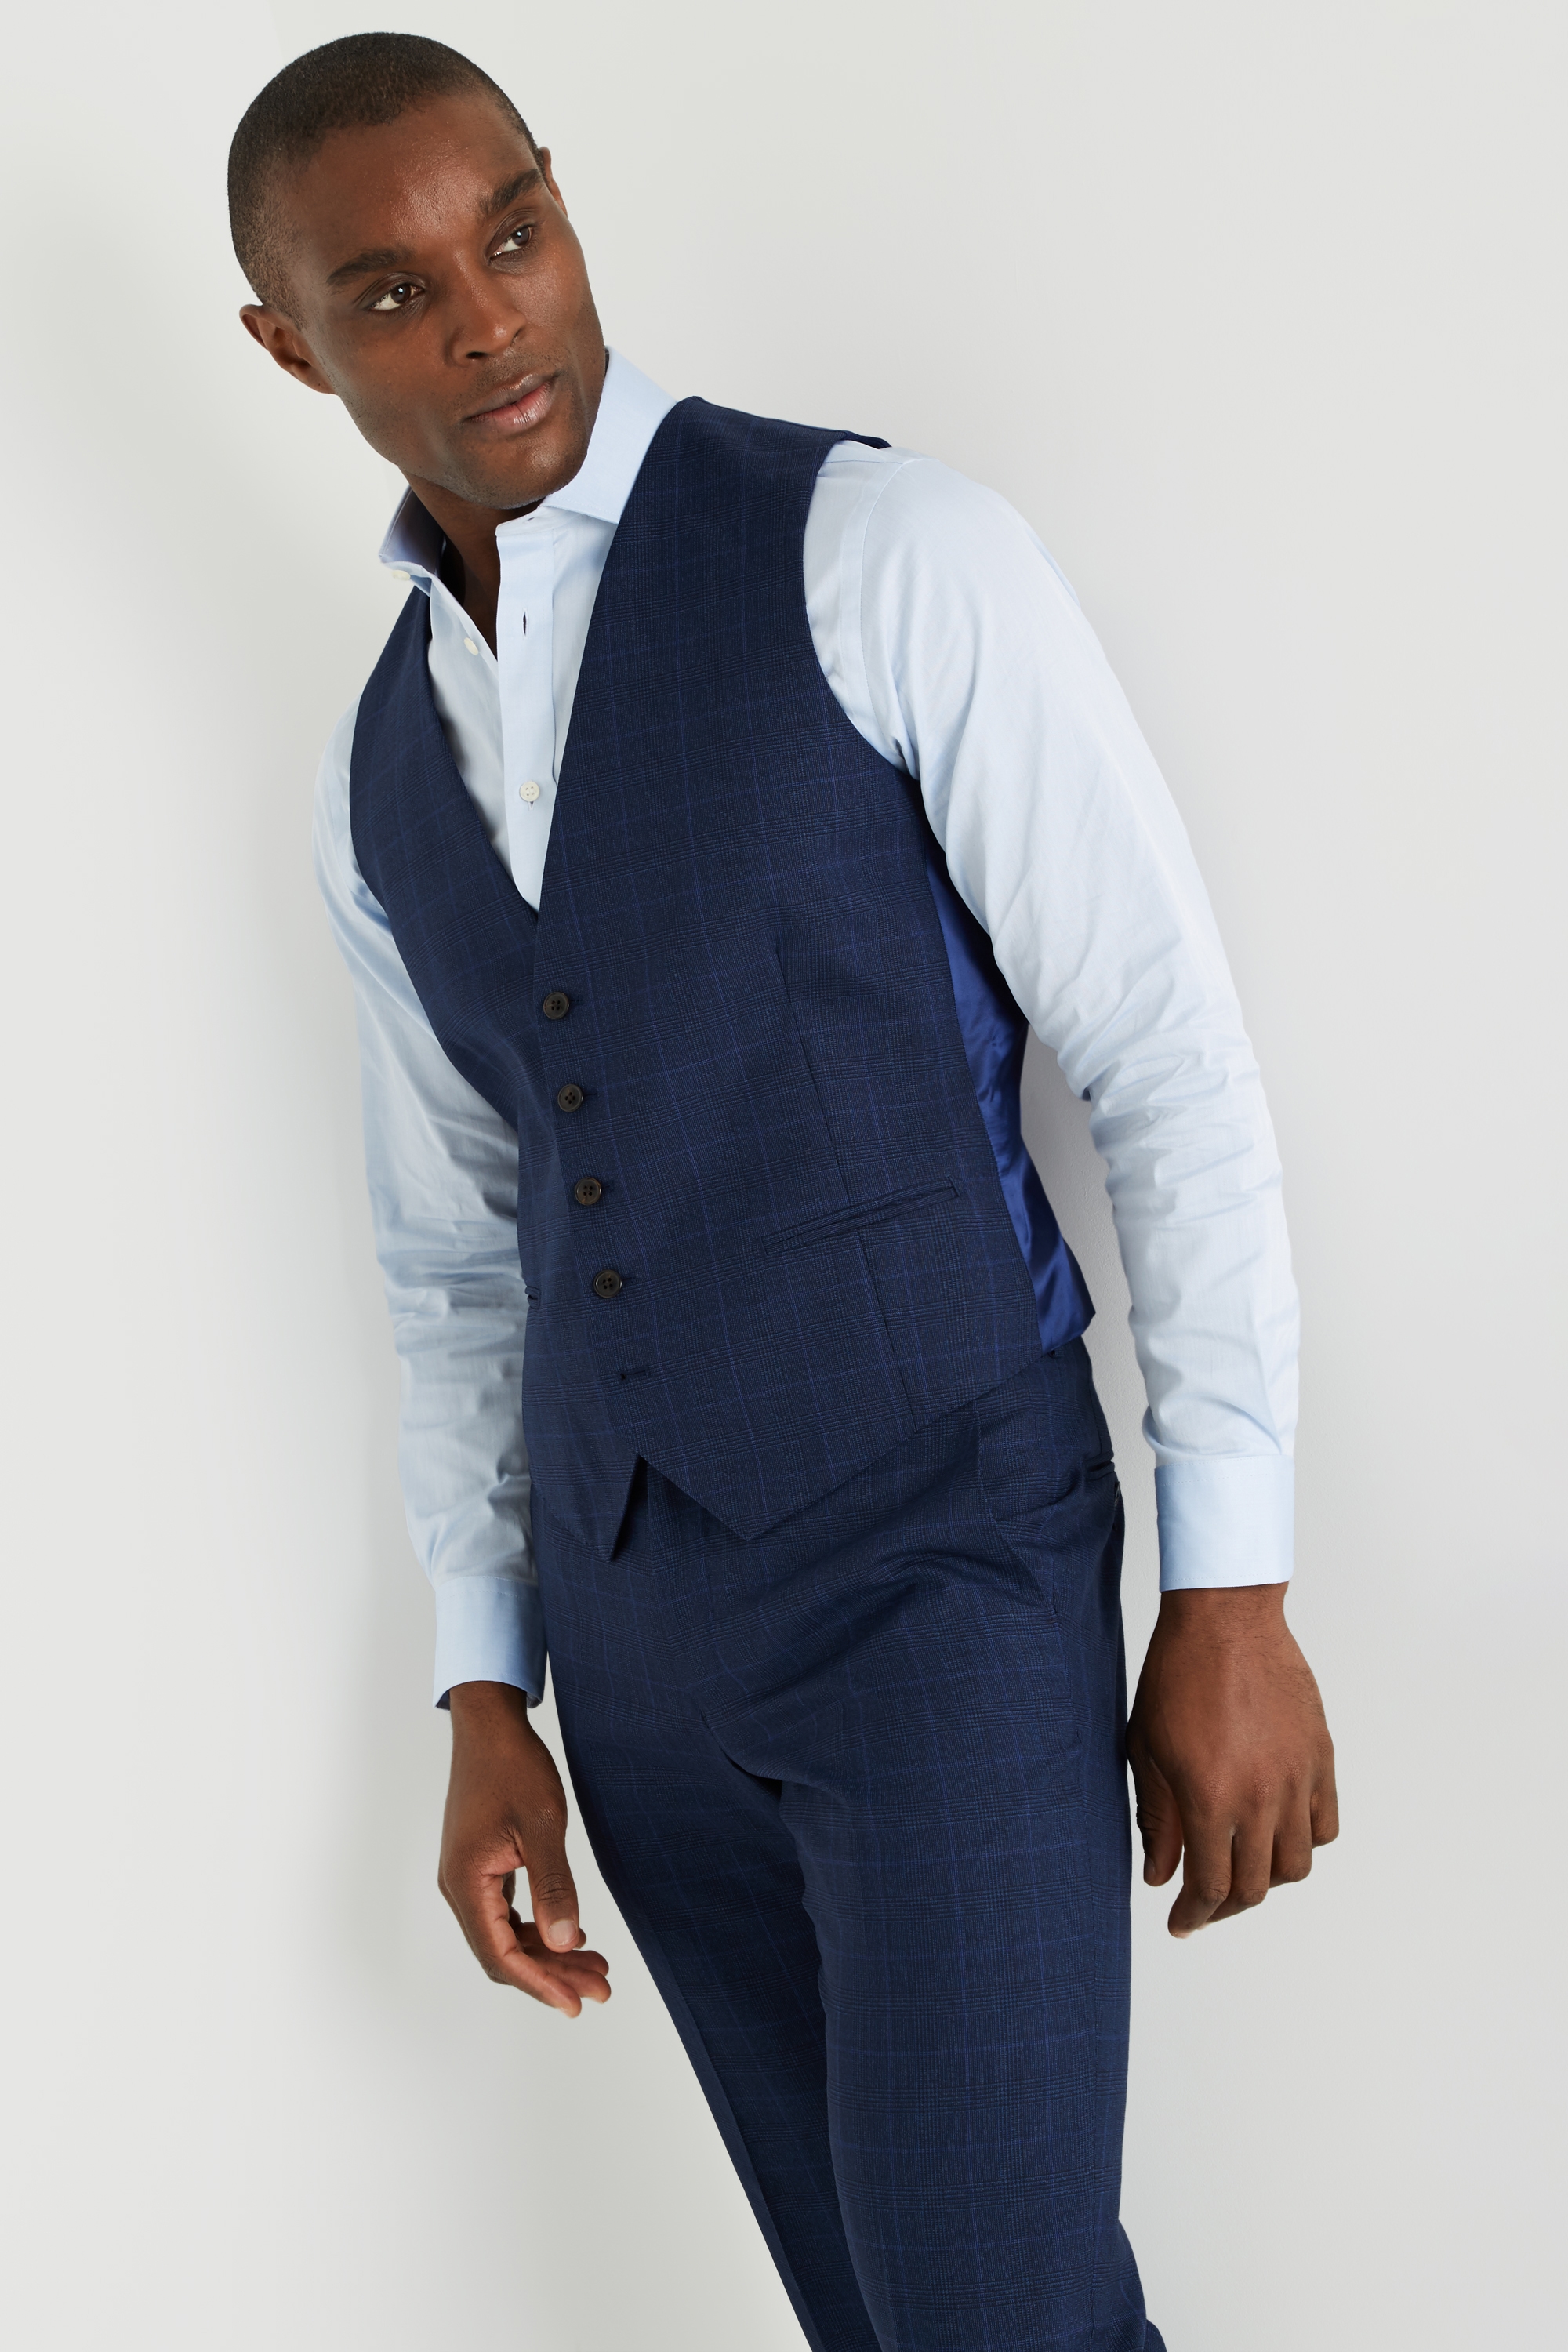 Savoy Taylors Guild Tailored Fit Bright Blue Check Waistcoat